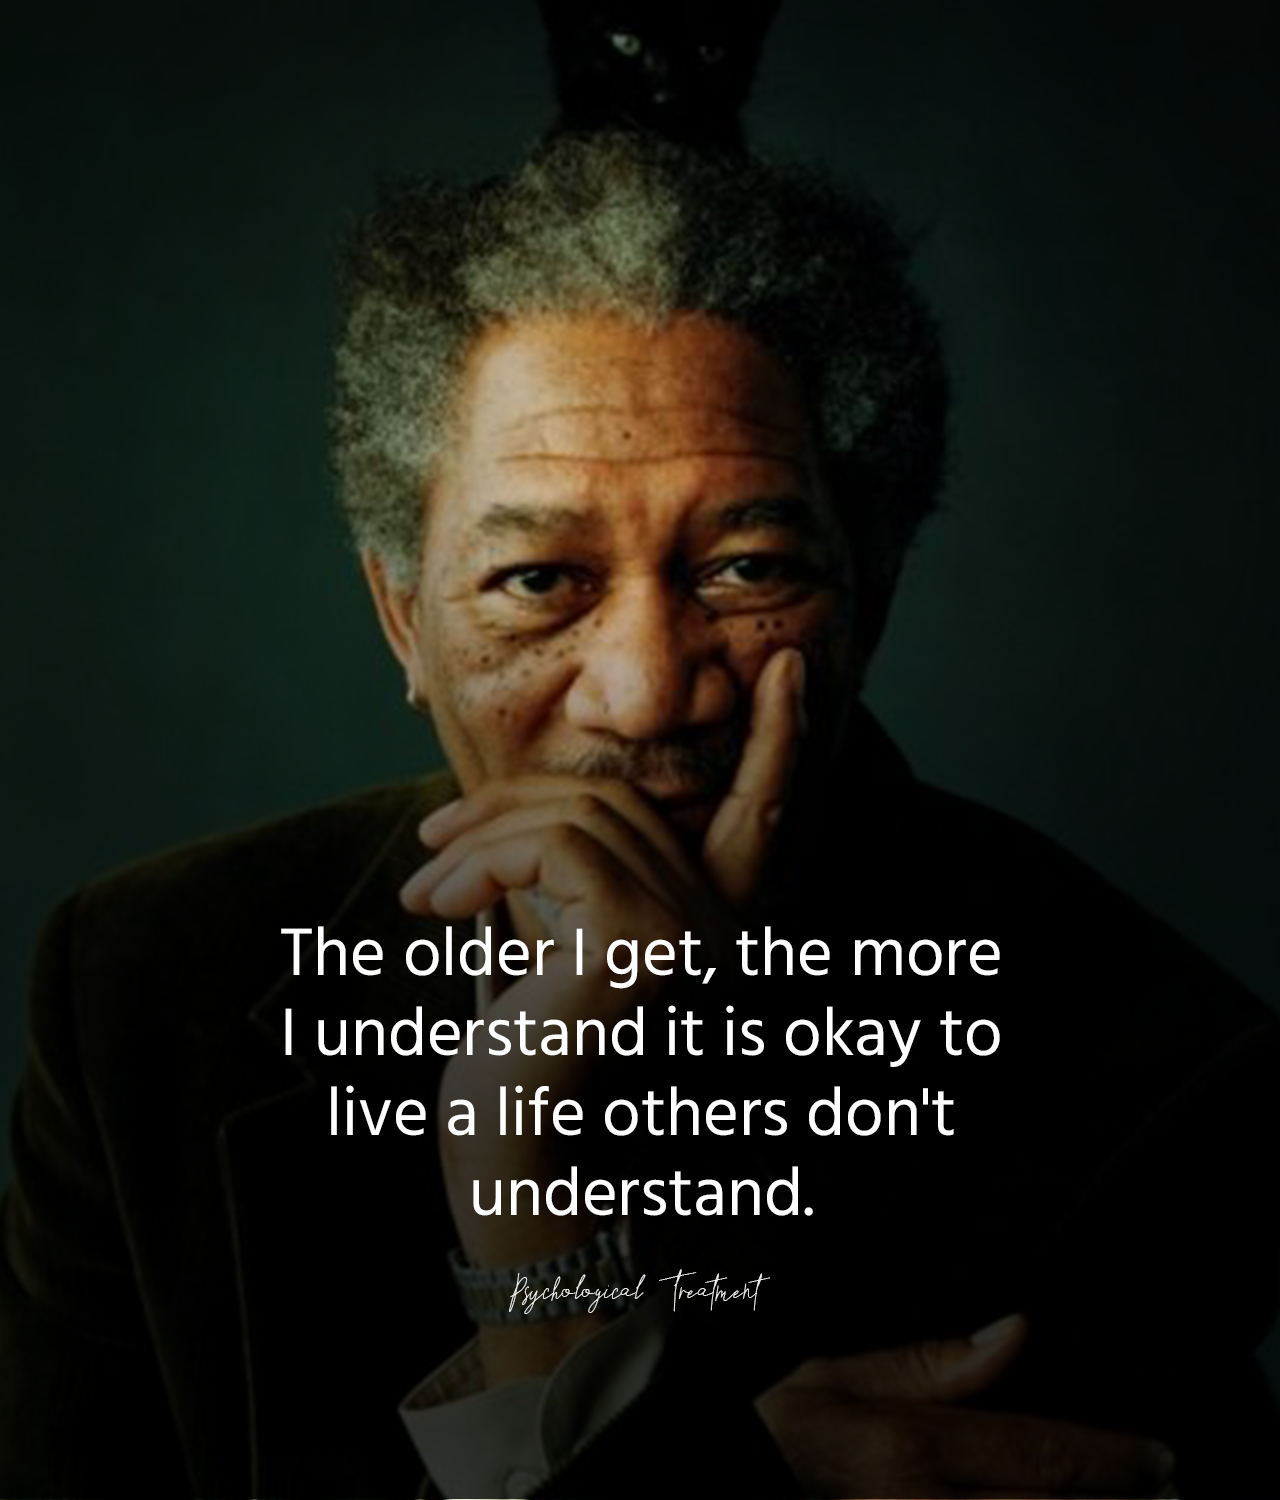 The older I get, the more I understand that it’s okay to live a life others don’t understand.